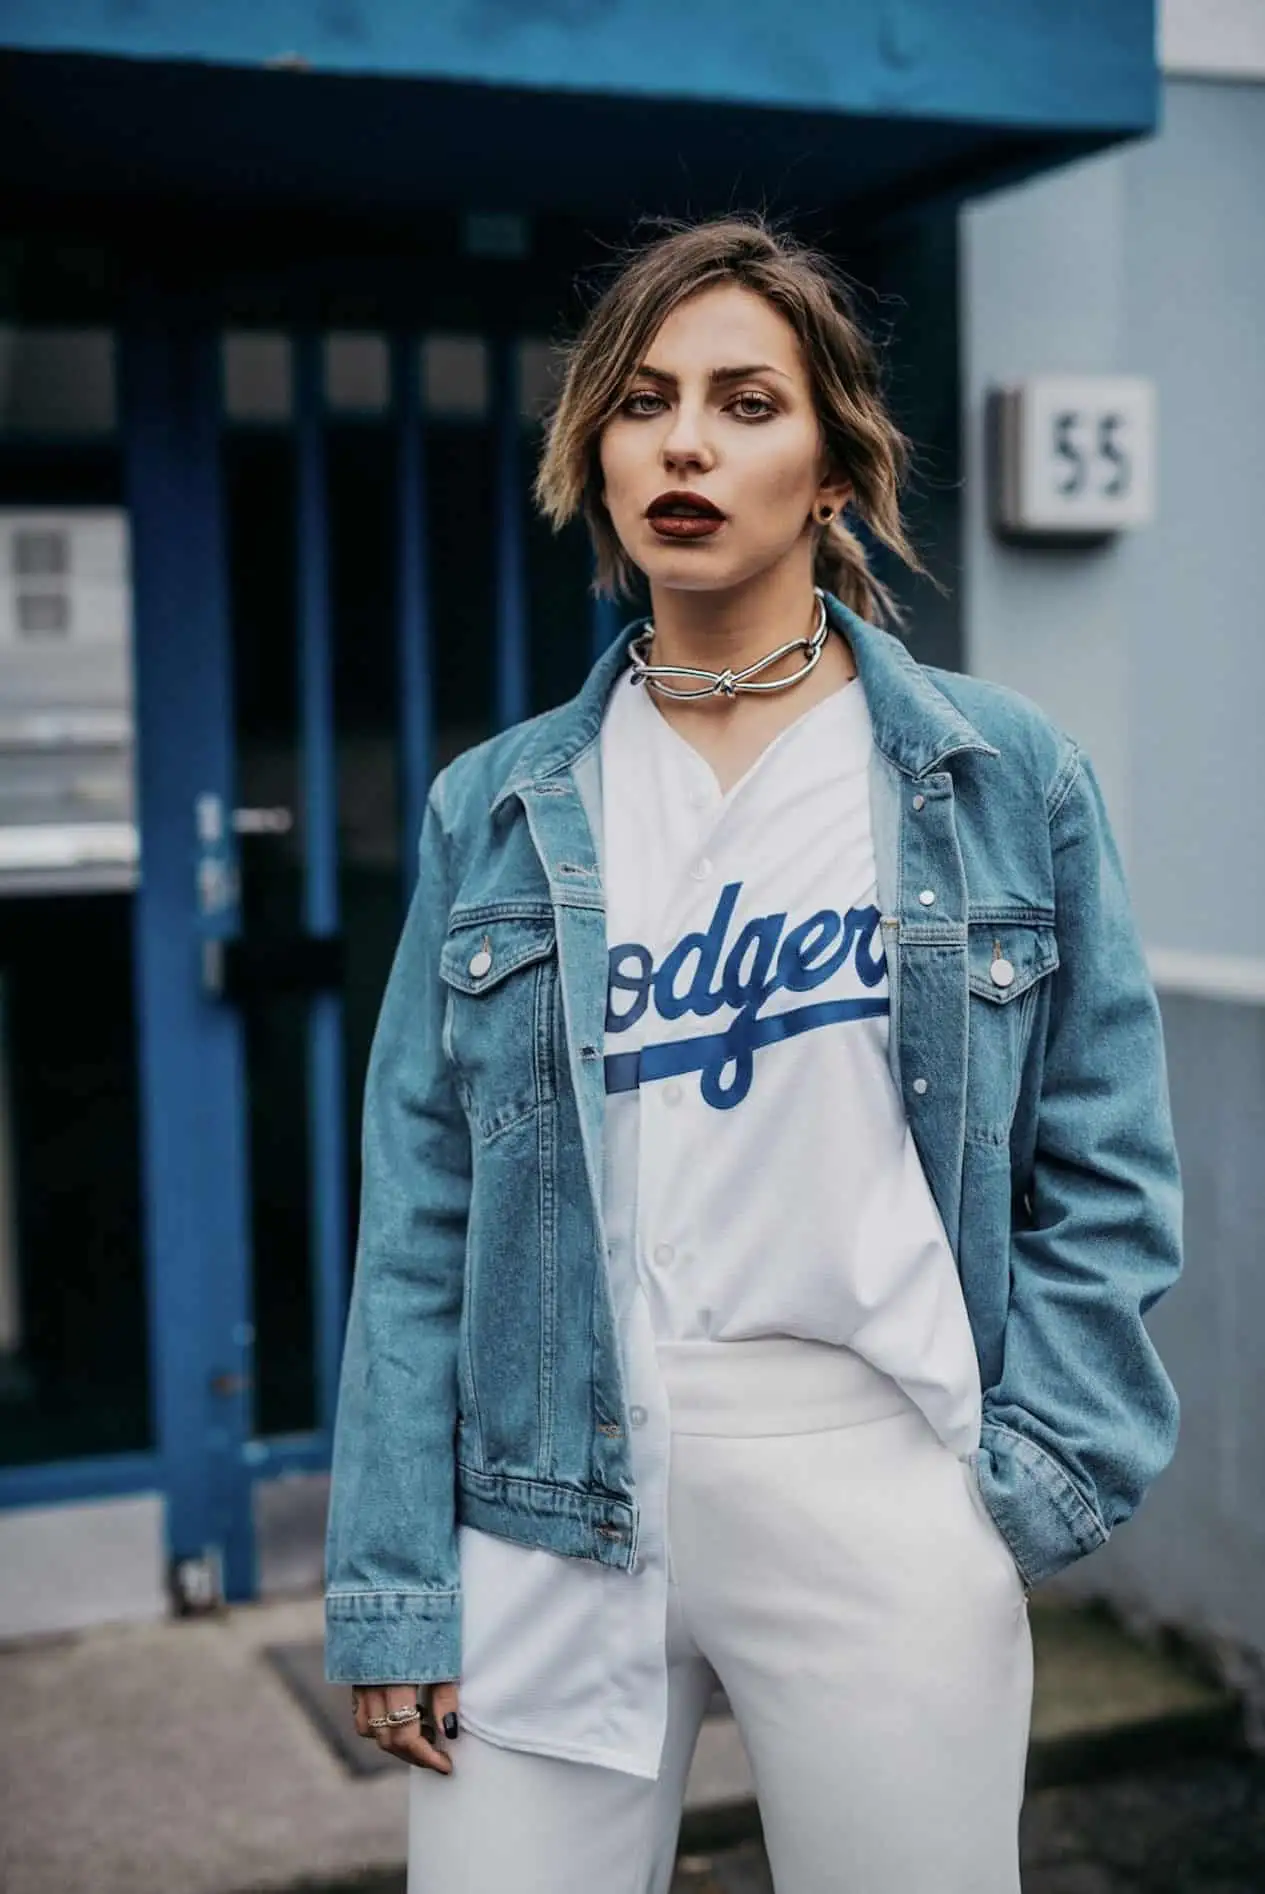 How To Style A Baseball Jersey: Best Tips And Tricks